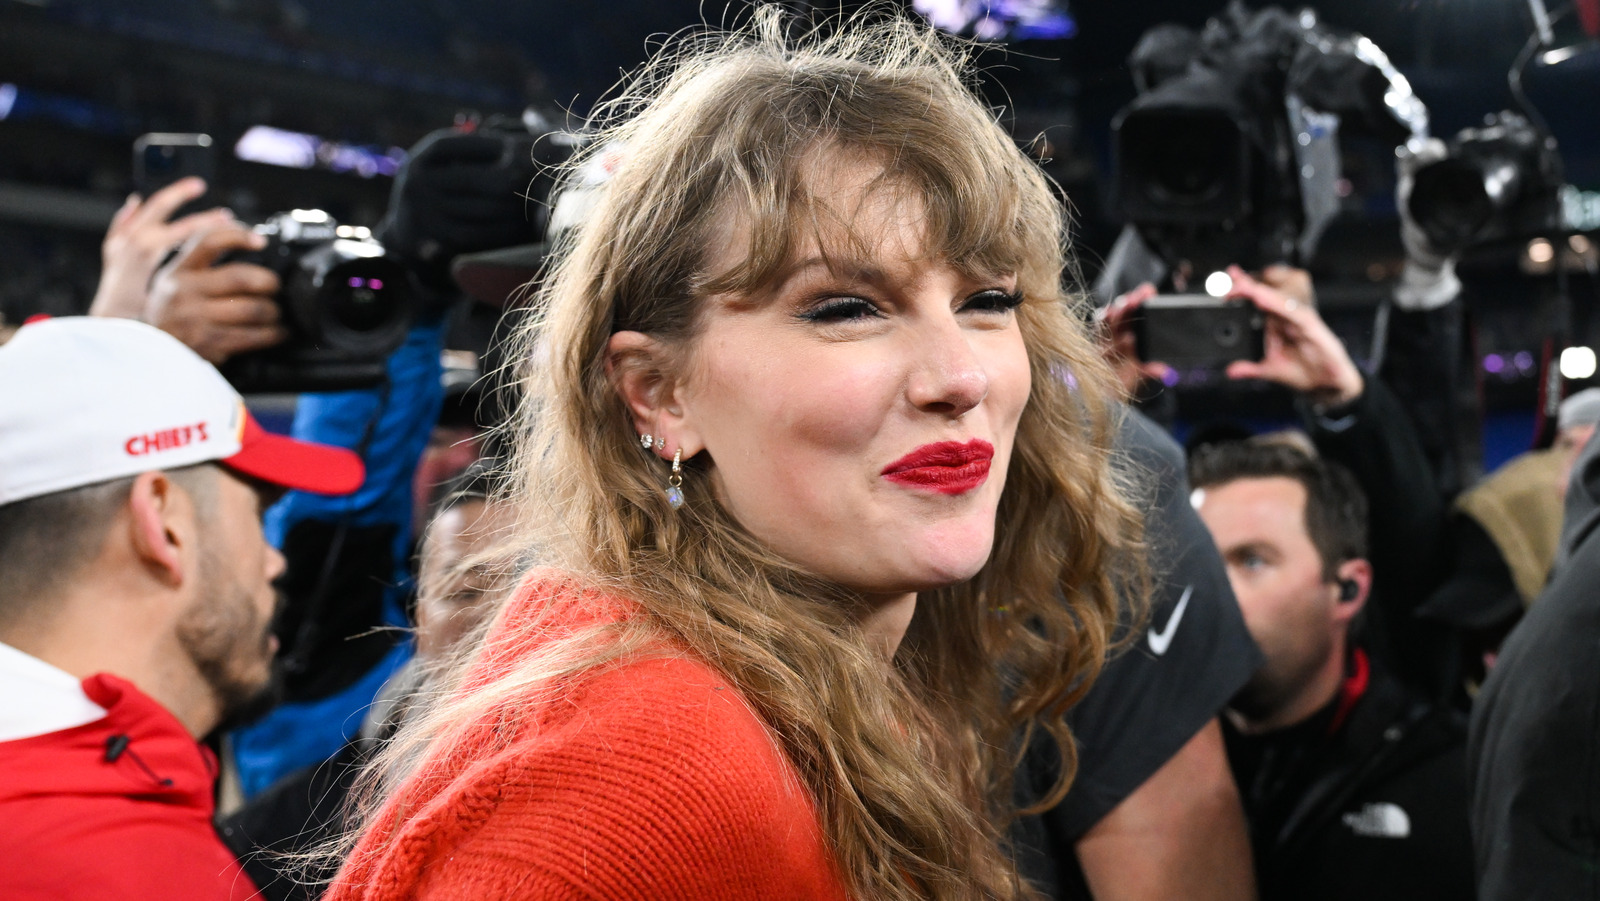 Taylor Swift Shakes Off Ravens Fans' Rage With Classy Comeback